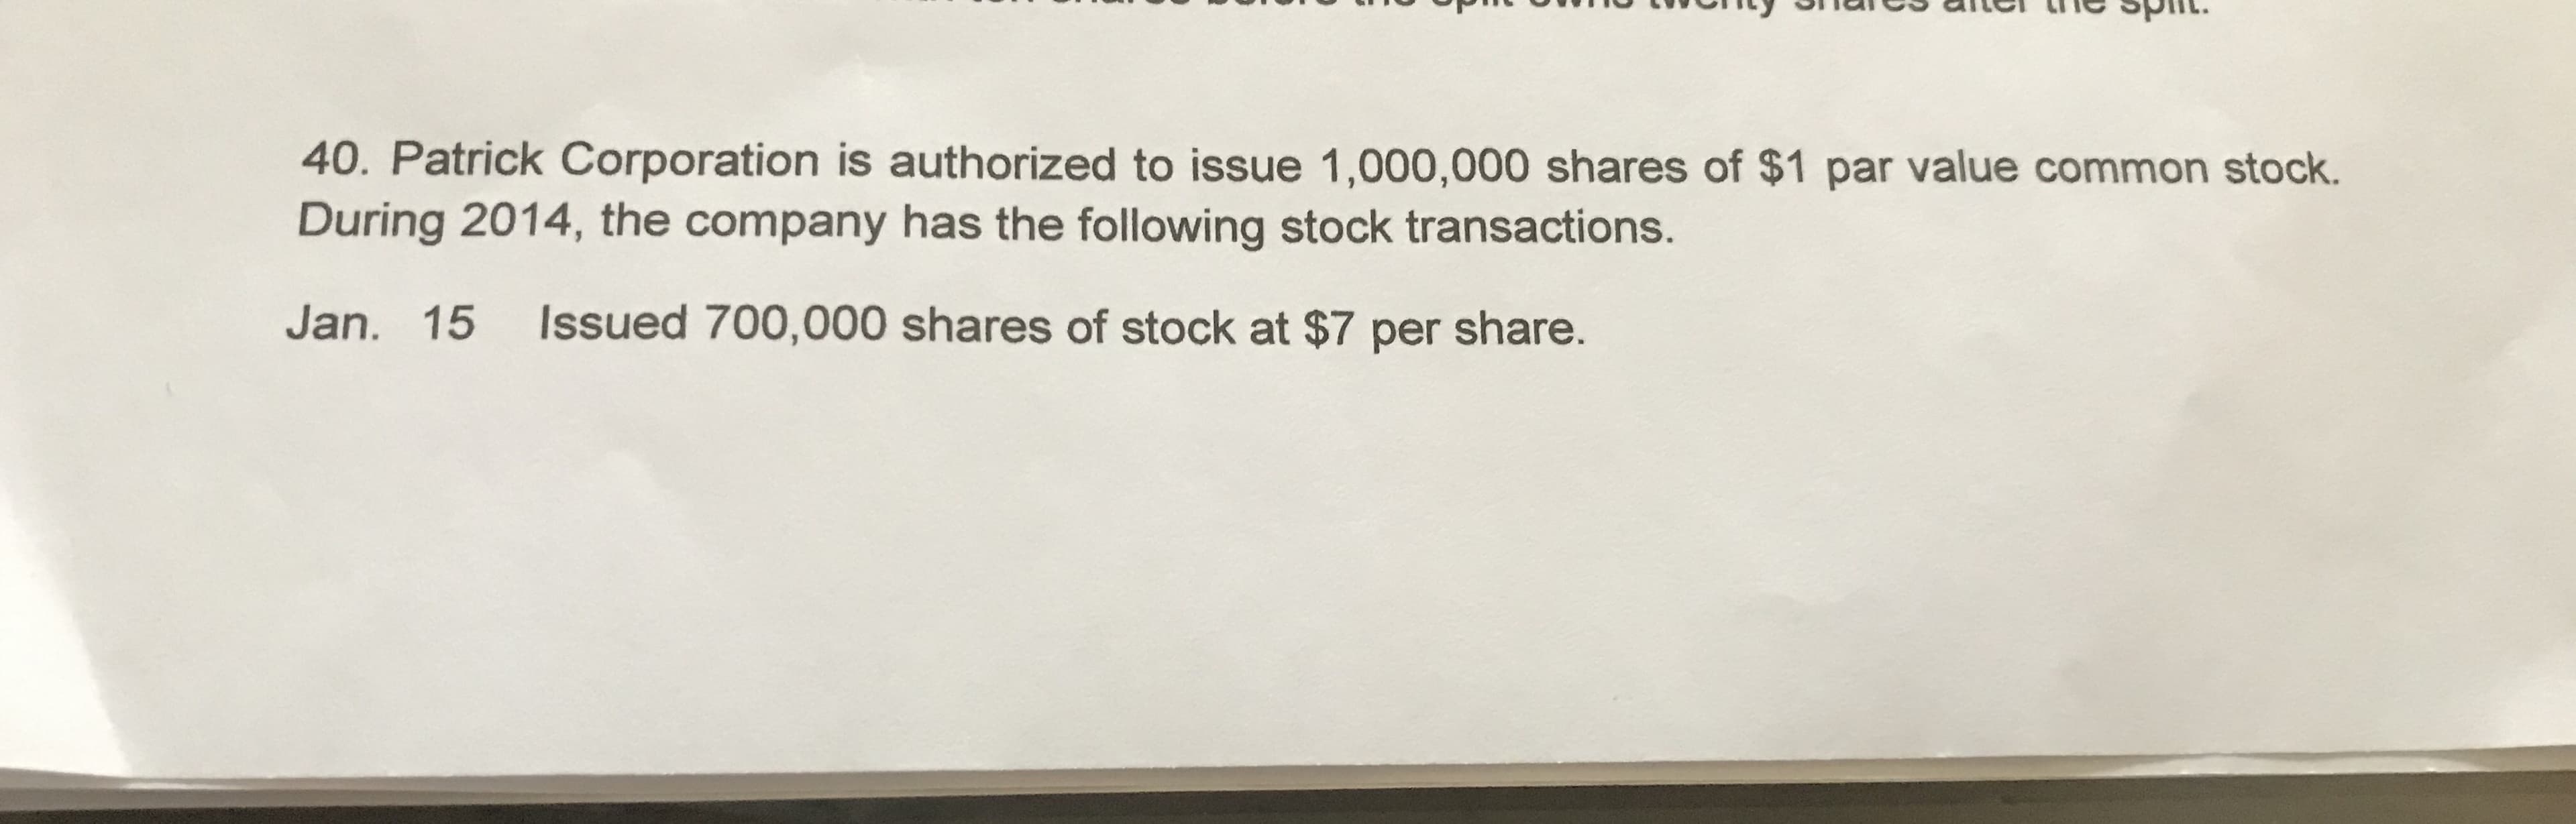 40. Patrick Corporation is authorized to issue 1,000,000 shares of $1 par value common stock.
During 2014, the company has the following stock transactions.
Jan. 15
Issued 700,000 shares of stock at $7 per share.
